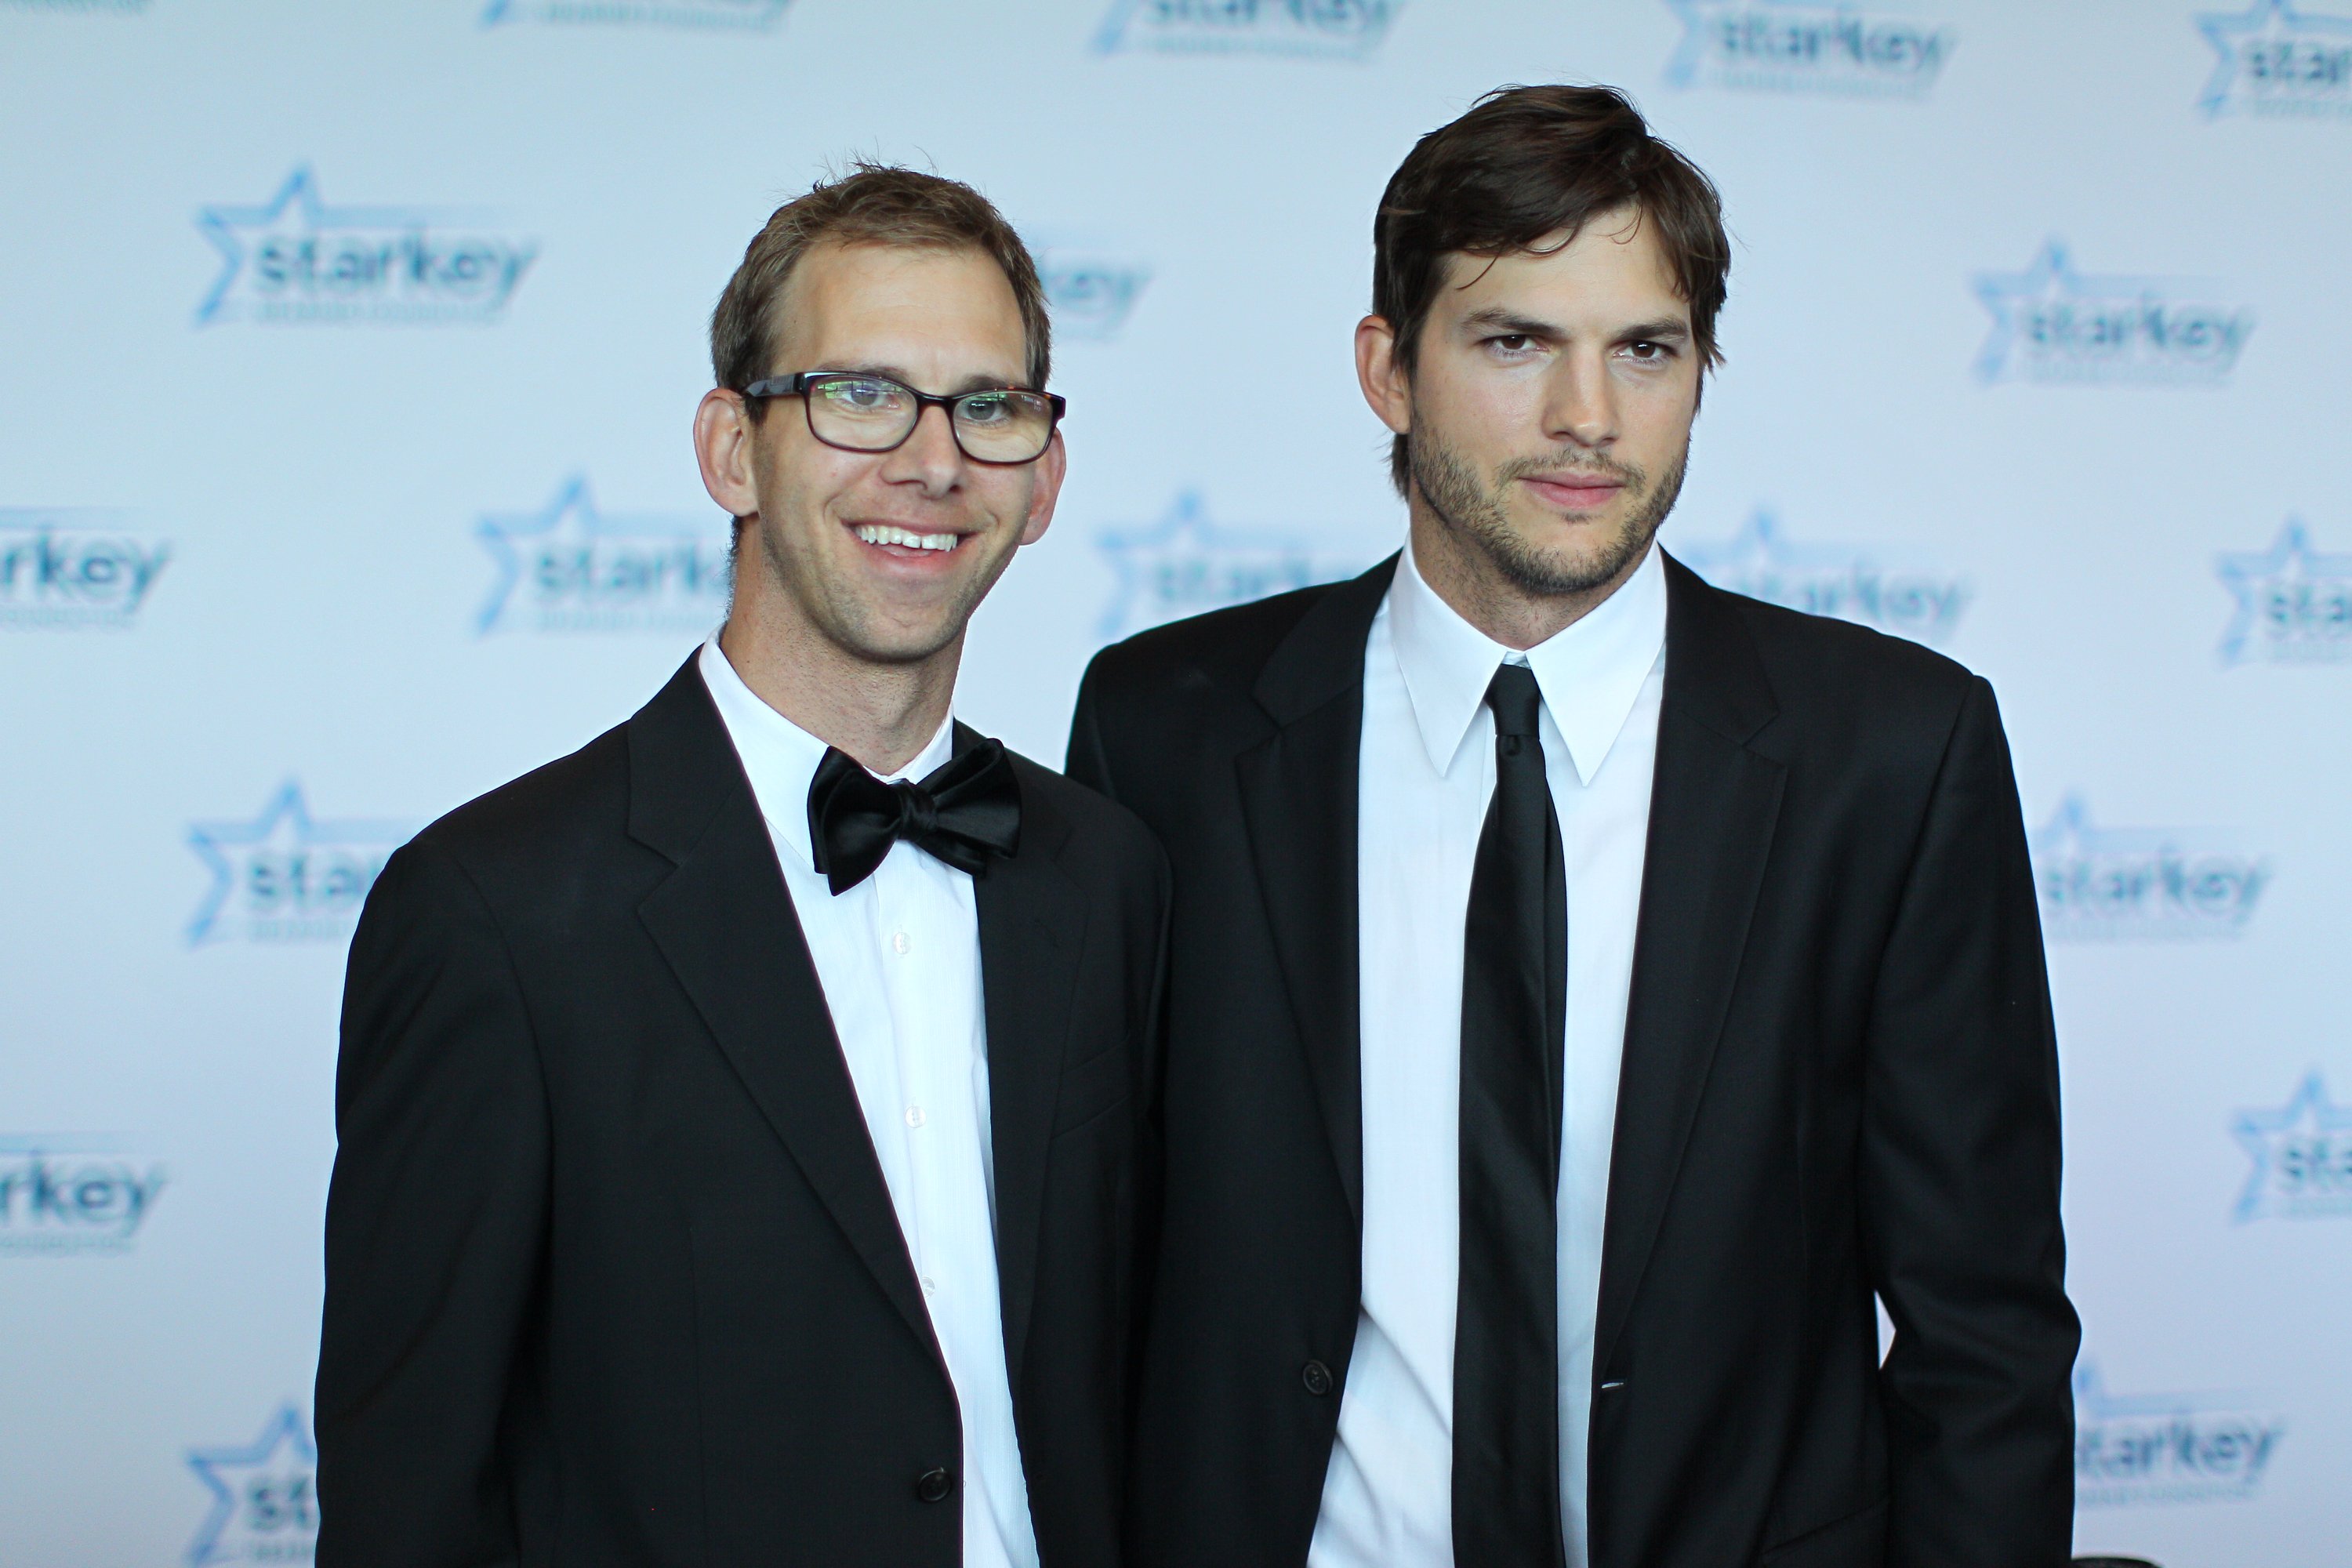 Michael Kutcher and Ashton Kutcher walk the red carpet on July 28, 2013 in St. Paul, Minnesota | Photo: Getty Images